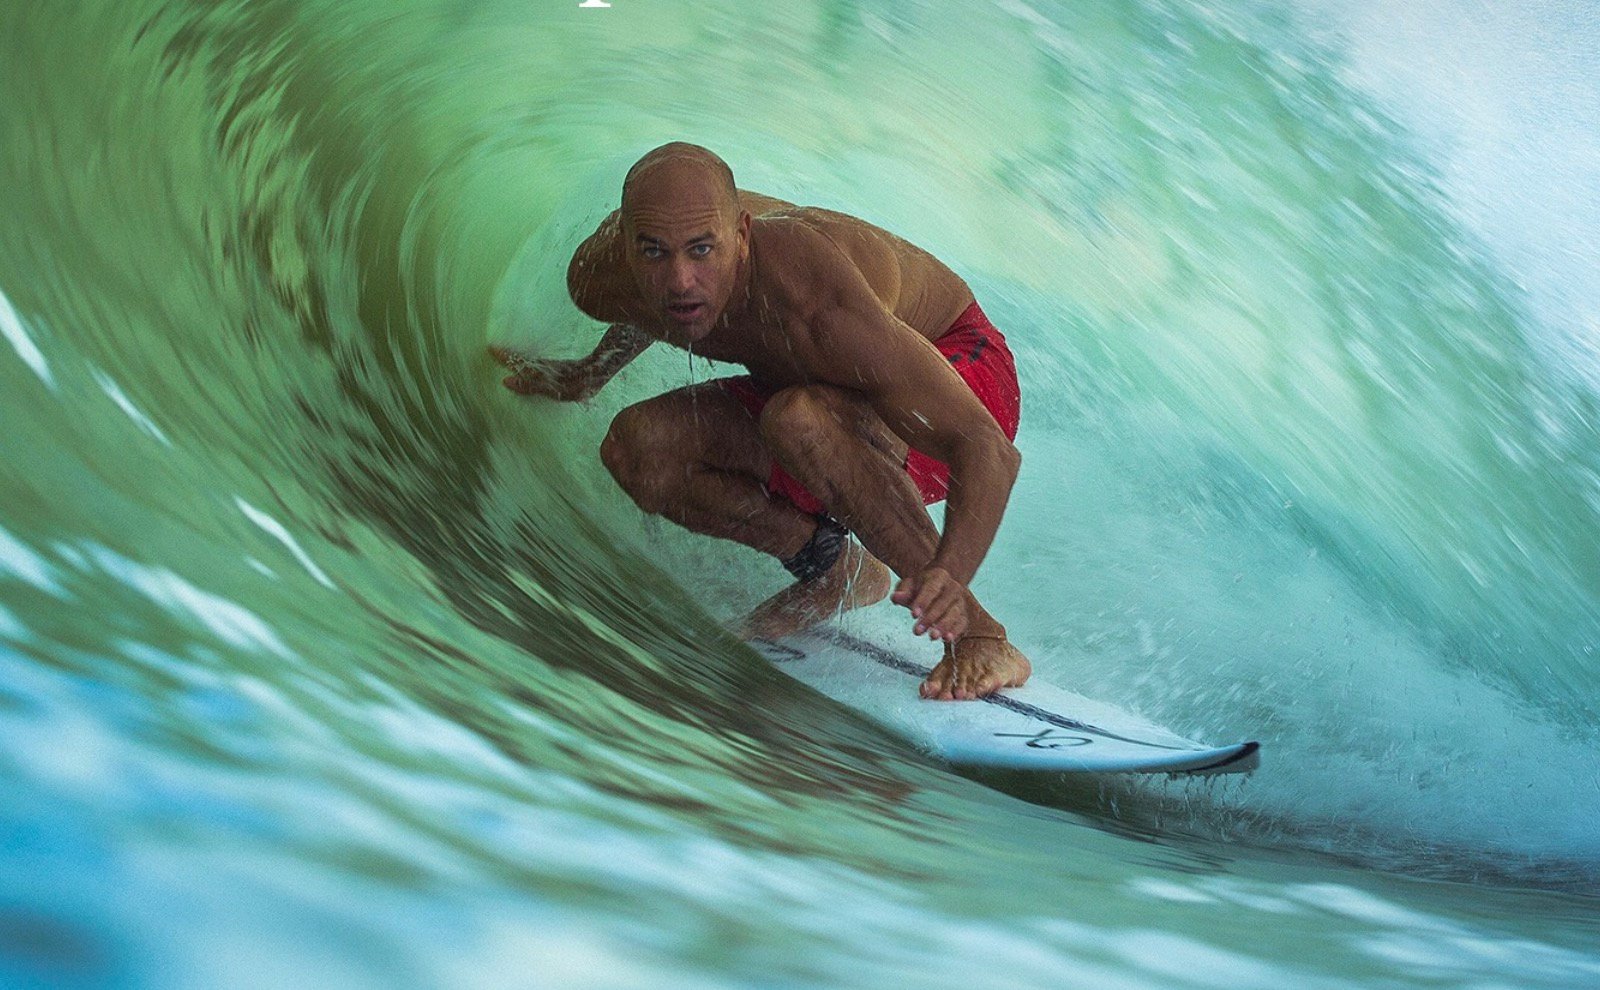 American Surfing Legend Kelly Slater Reveals His Mother Suffered an Adverse Reaction from the Pfizer Shot (VIDEO)